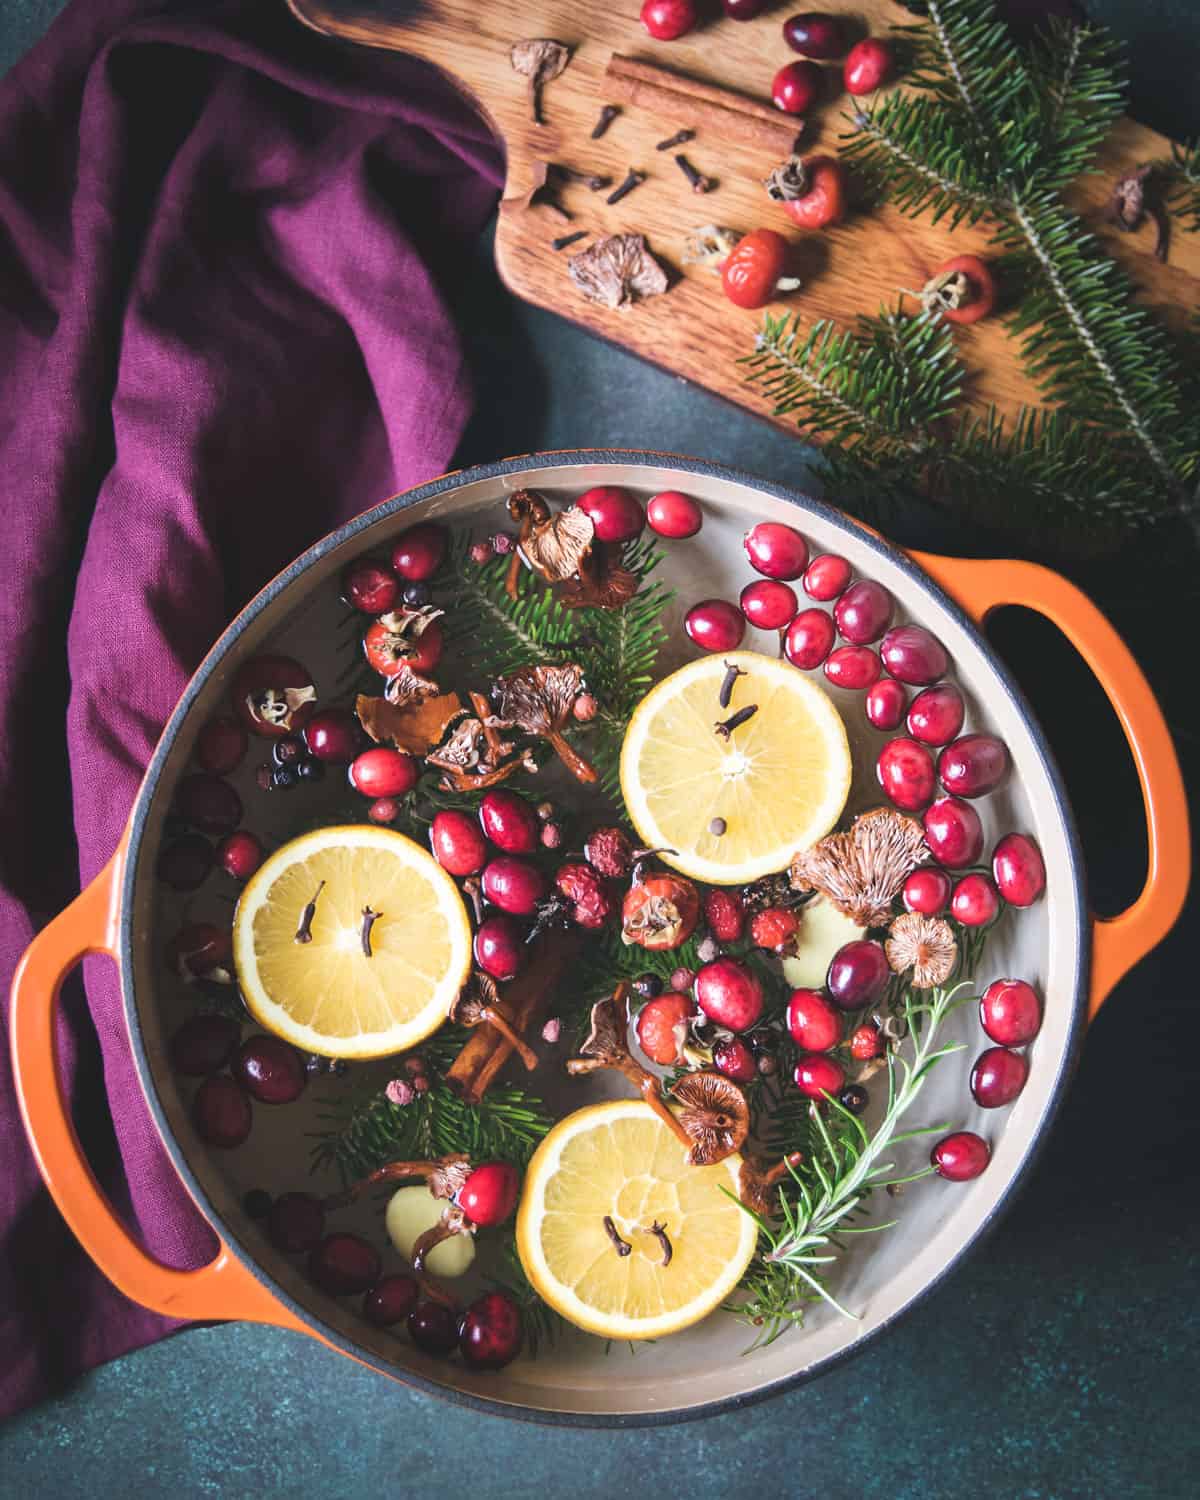 a simemr pot filled with cranberries, orange slices, pine branches, candy cap mushrooms and spices